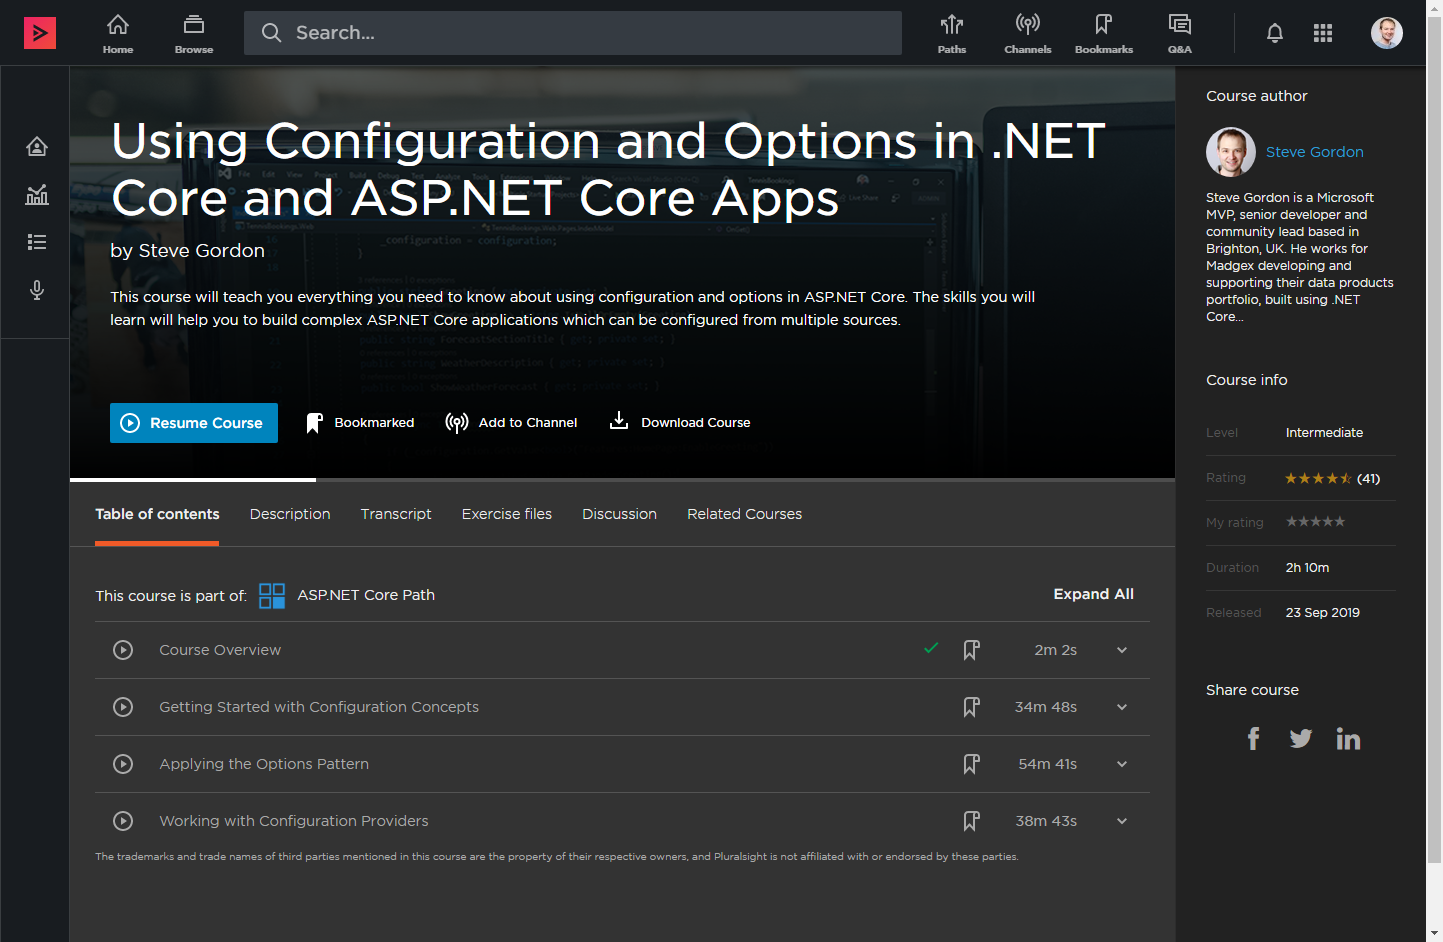 Using Configuration and Options in .NET Core and ASP.NET Core Apps Home Page